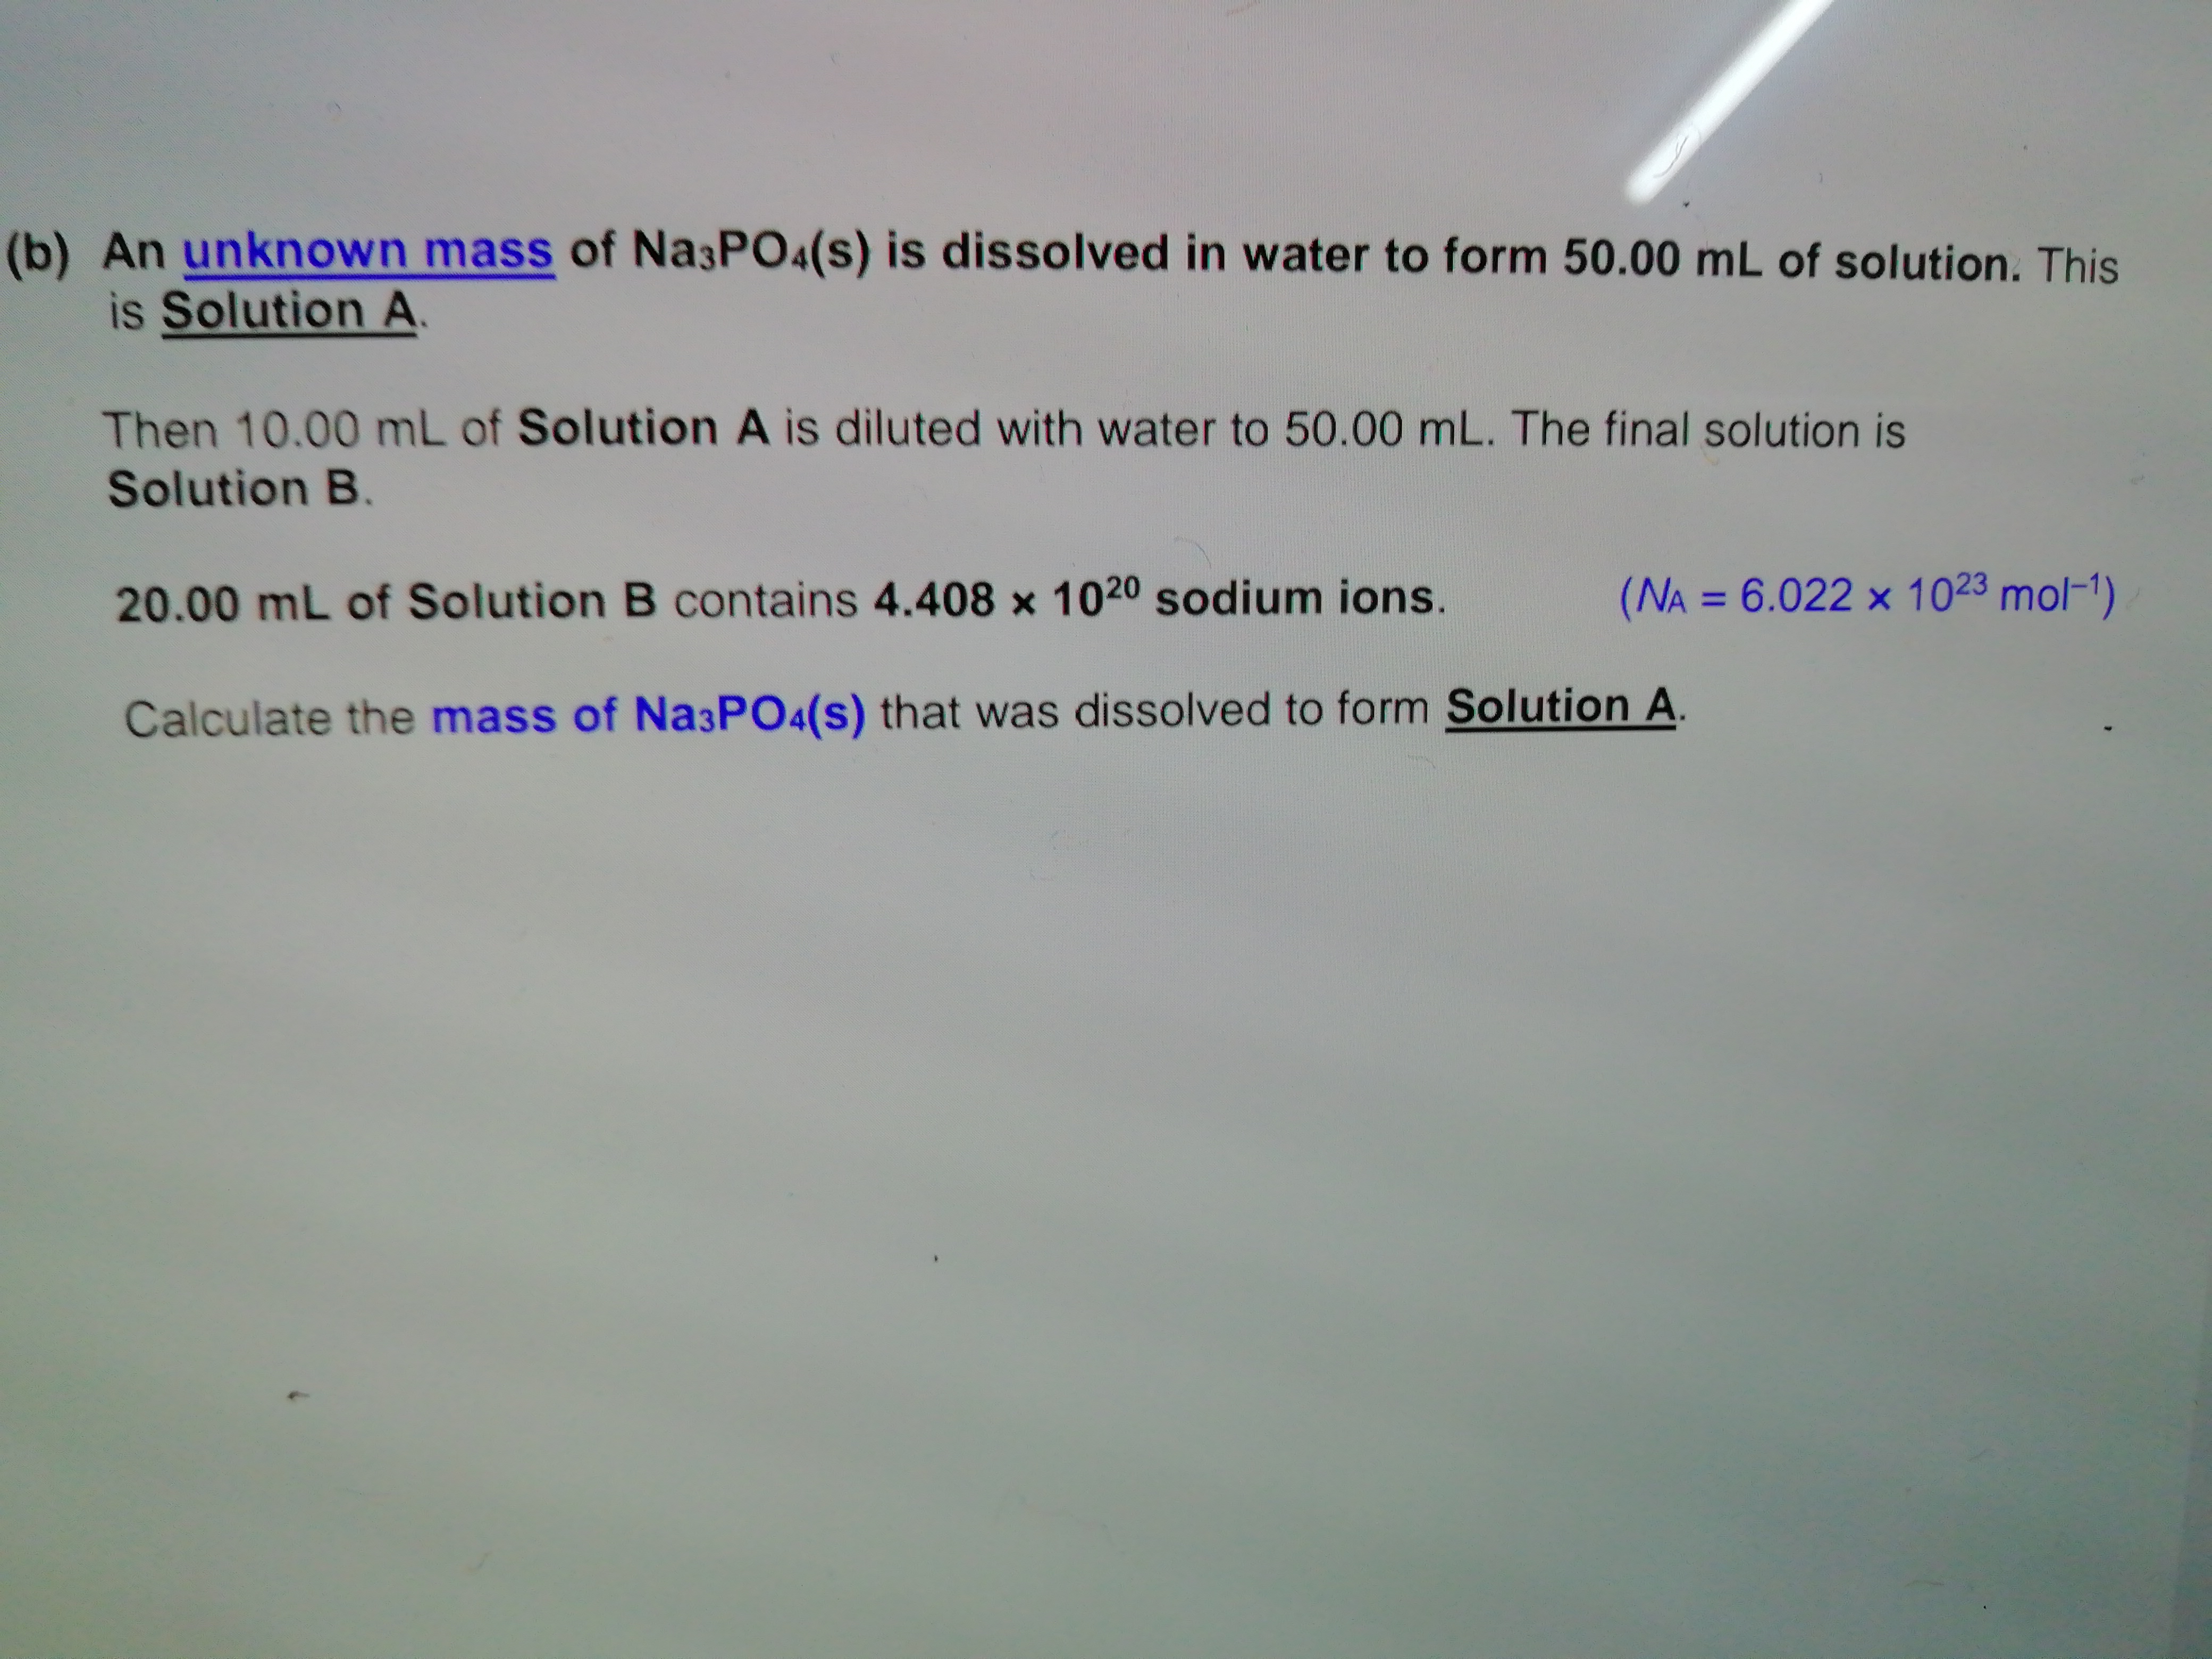 An unknown mass of Na3PO4(s) is dissolved in water to form 50.00 mL of solution. This
is Solution A
Then 10.00 mL of Solution A is diluted with water to 50.00 mL. The final solution is
Solution B.
20.00 mL of Solution B contains 4.408 x 1020 sodium ions.
(NA = 6.022 × 1023 mol-1)
%3D
Calculate the mass of Na3PO4(s) that was dissolved to form Solution A,
